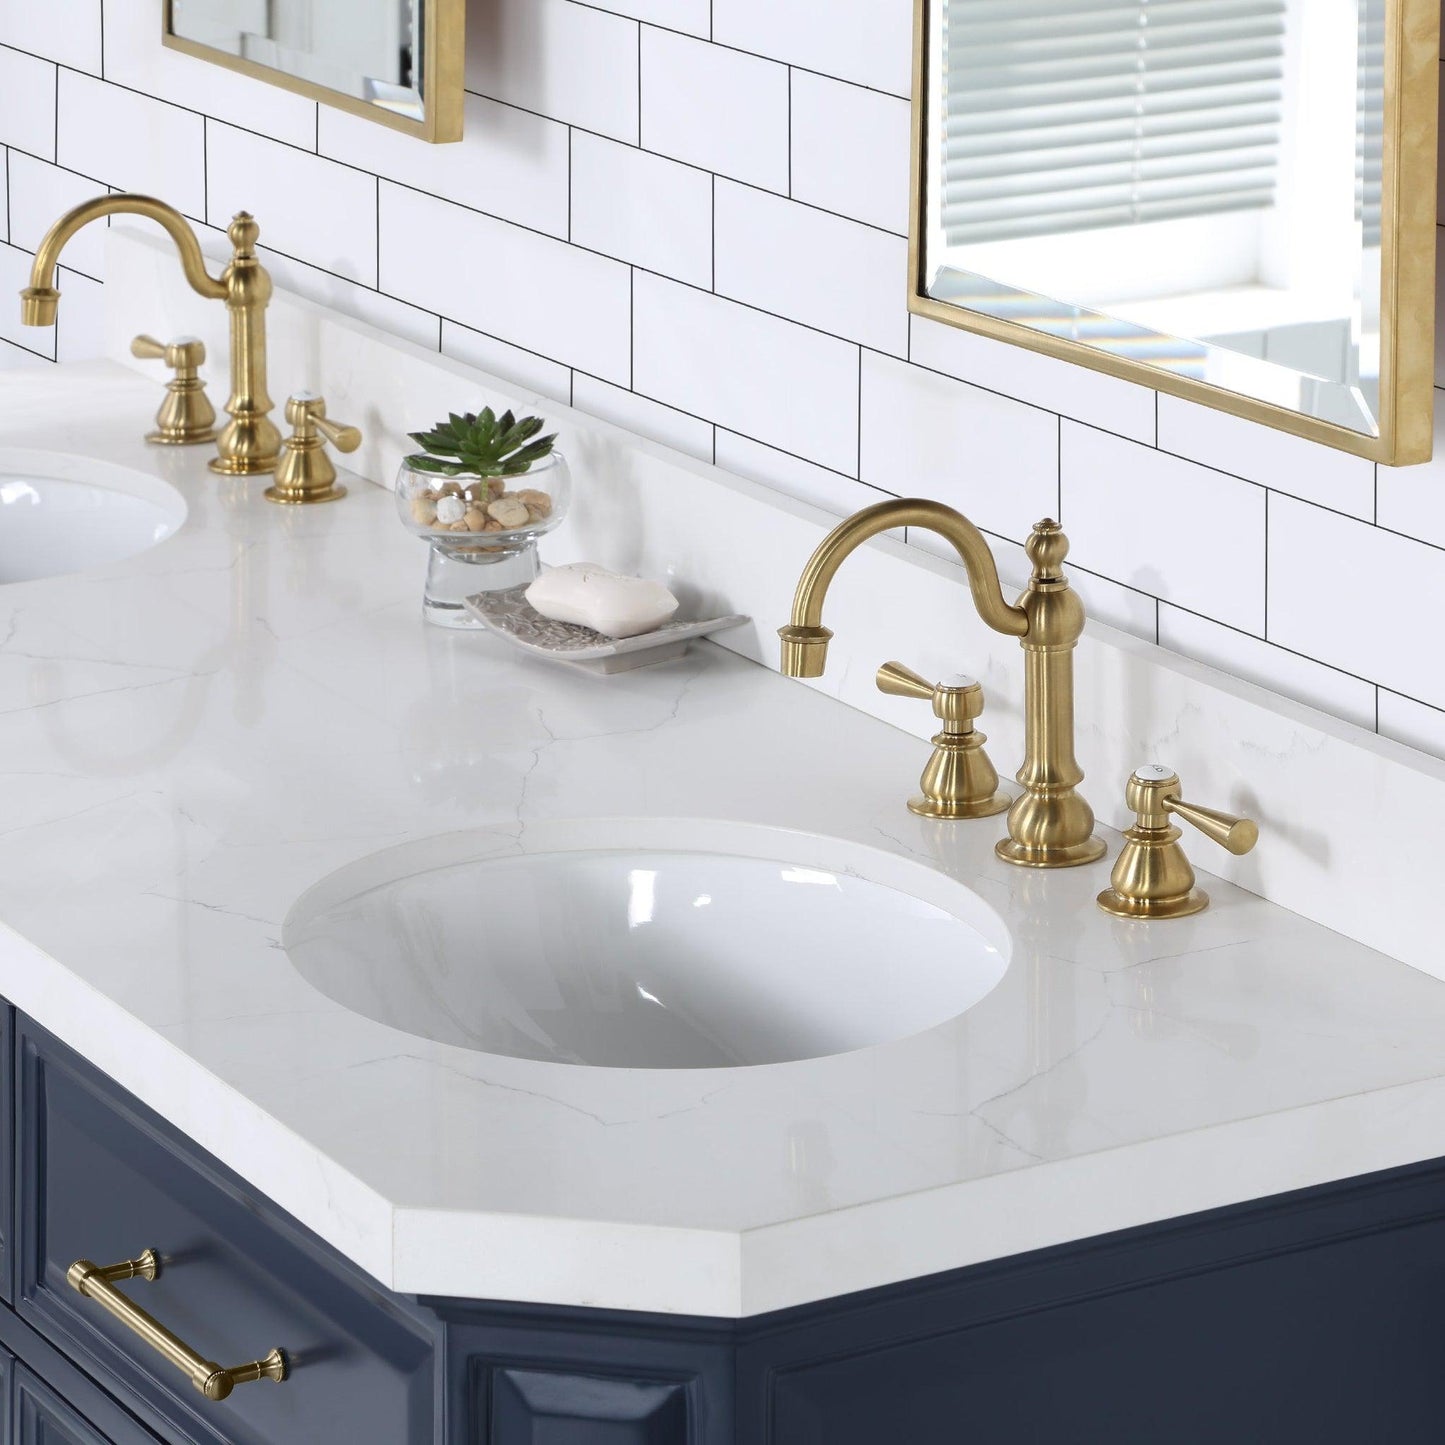 Water Creation Palace 72" Double Sink White Quartz Countertop Vanity in Monarch Blue with Hook Faucets and Mirrors